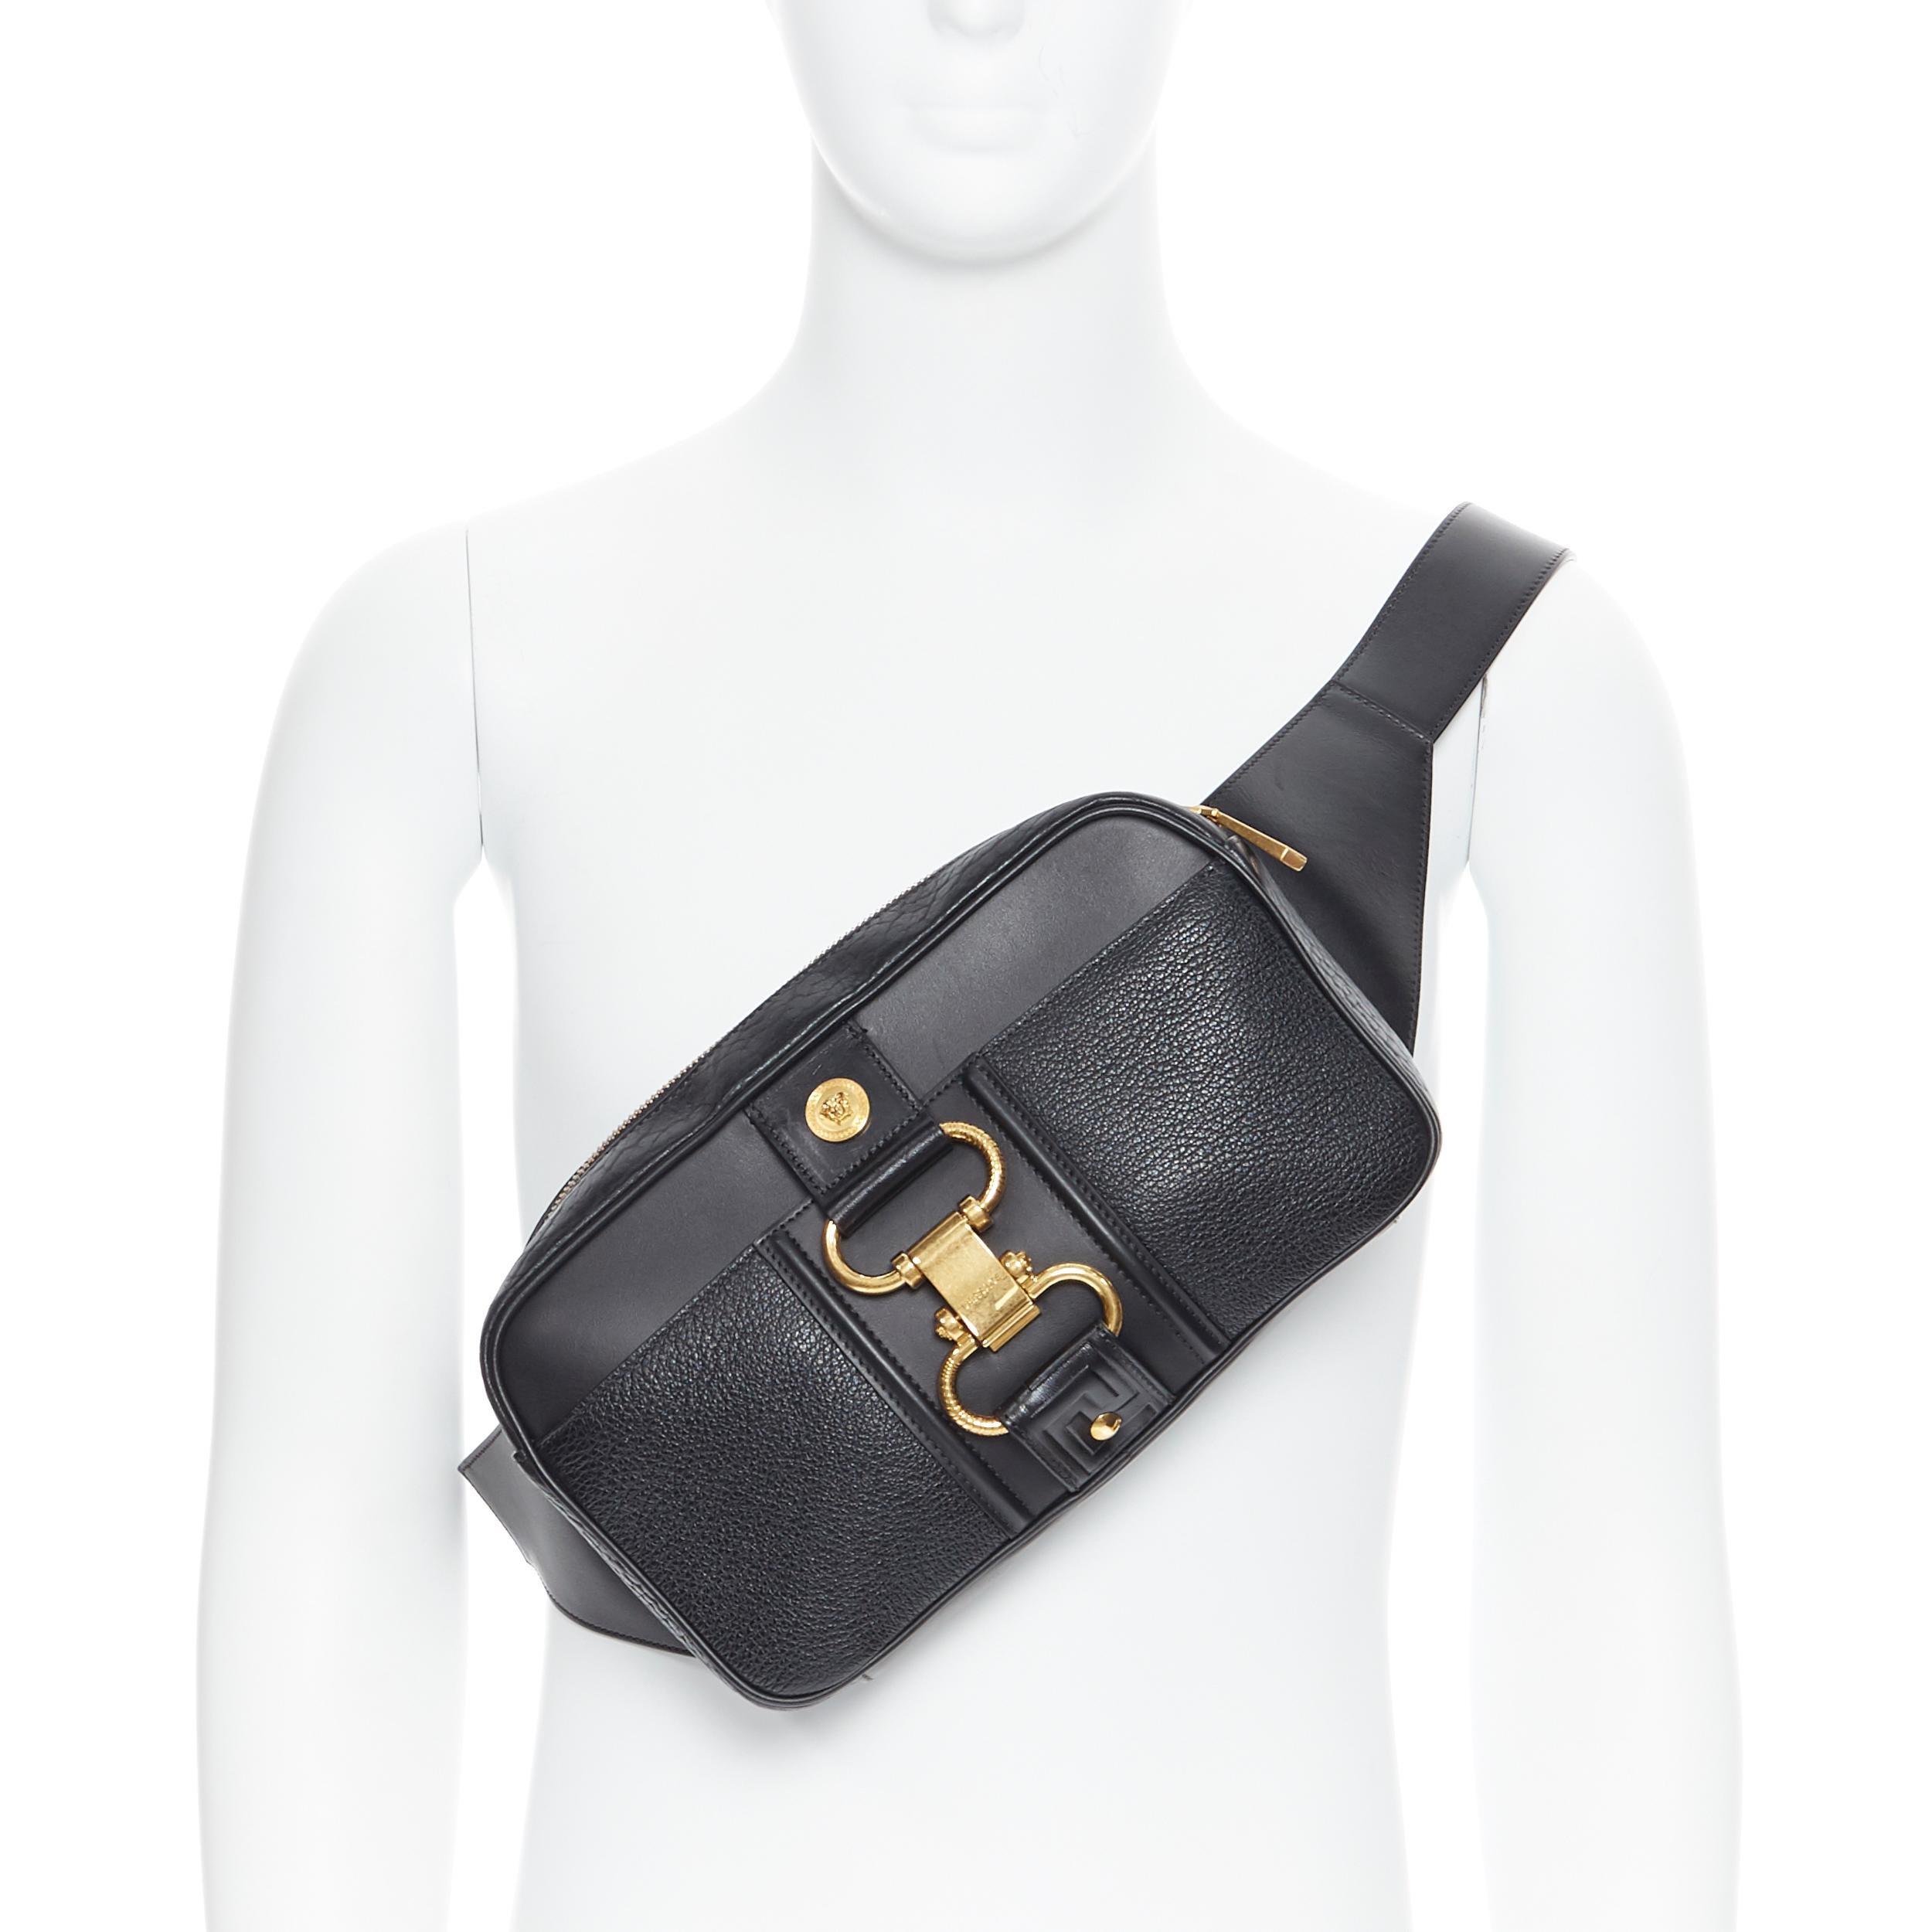 new VERSACE 2019 Runway black leather clasp buckle Medusa crossbody belt bag 
Reference: TGAS/B00070 
Brand: Versace 
Designer: Donatella Versace 
Model: Leather waist bag 
Collection: Fall Winter 2019 Runway 
Material: Leather 
Color: Black